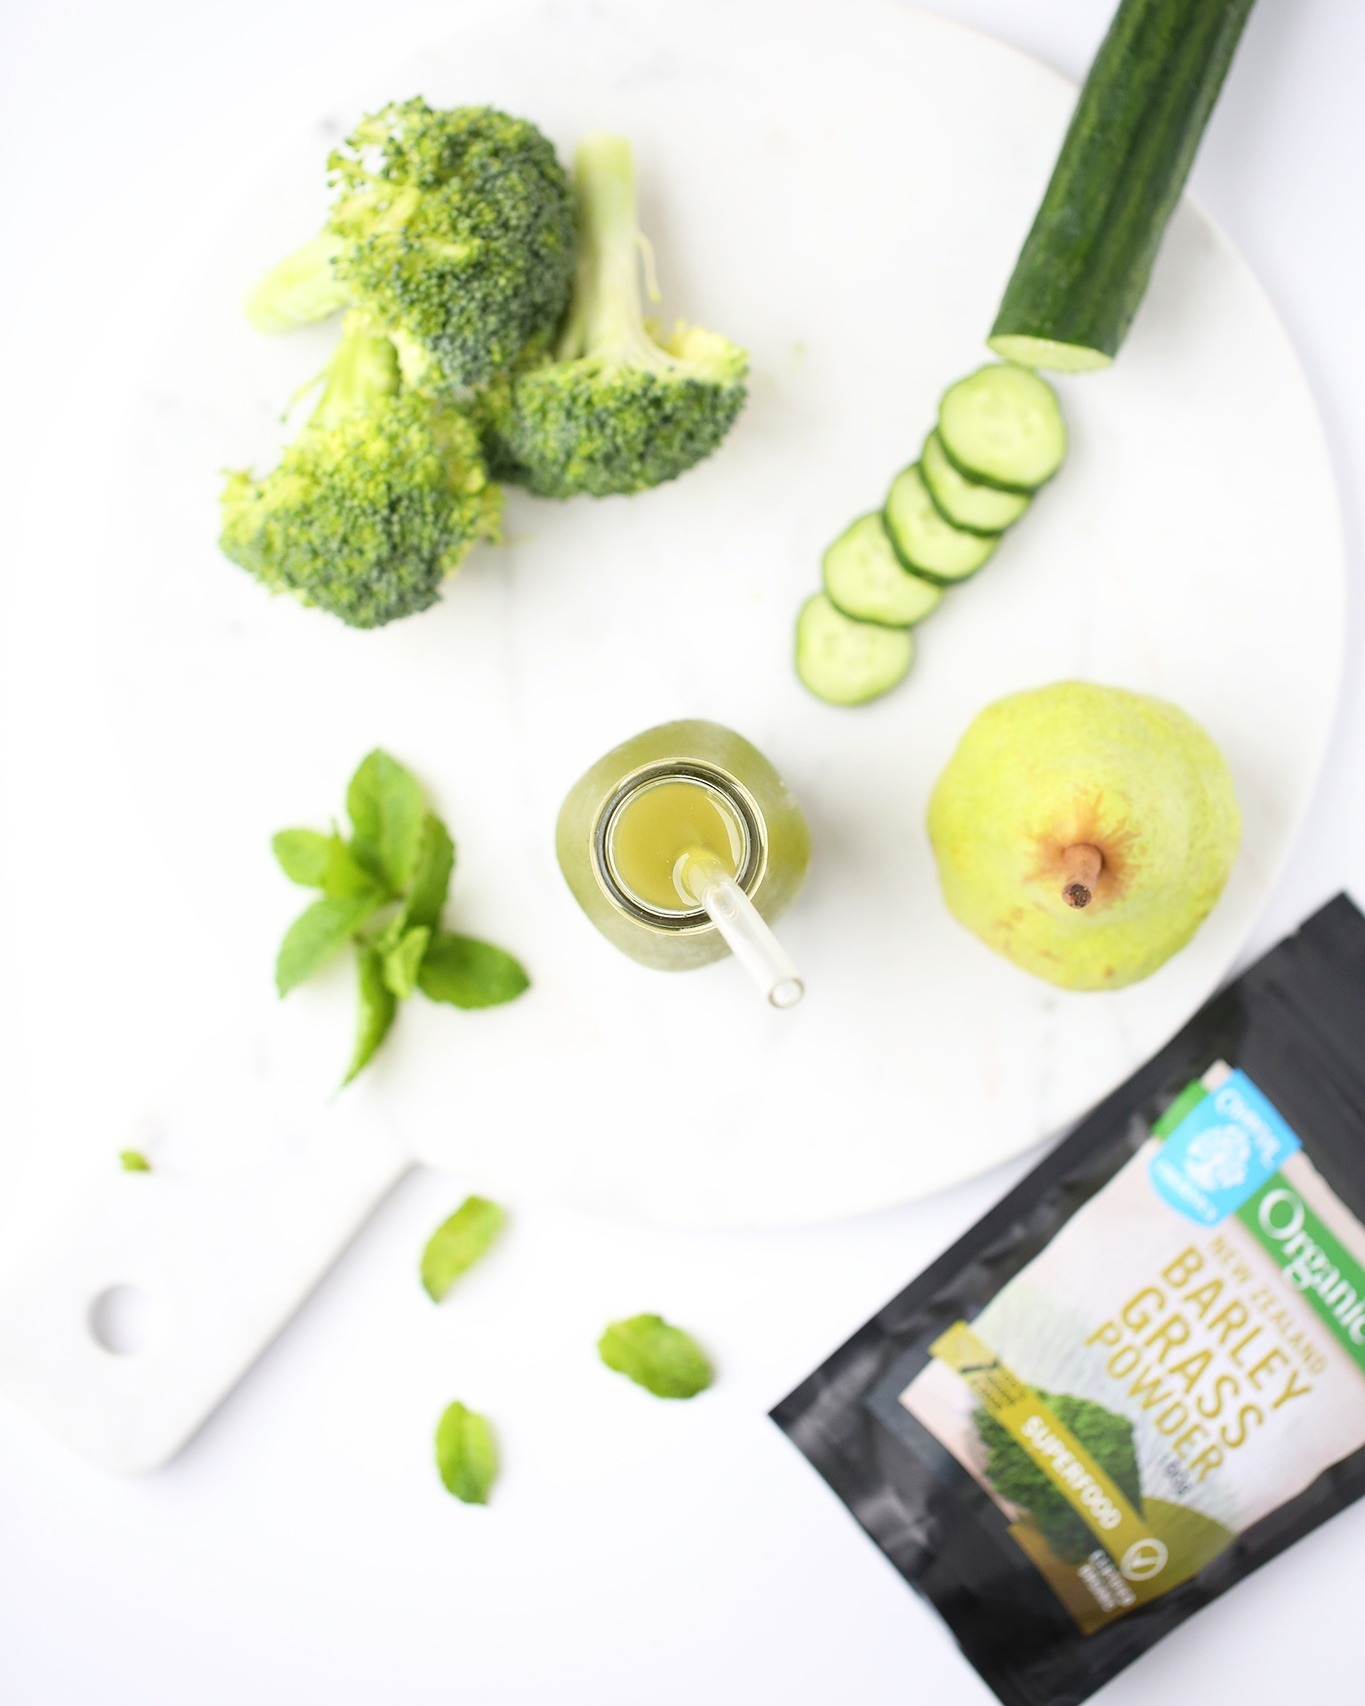 Green Juice with Barley-grass, Apple, Cucumber and Broccoli by Buffy Ellen from Be Good Organics